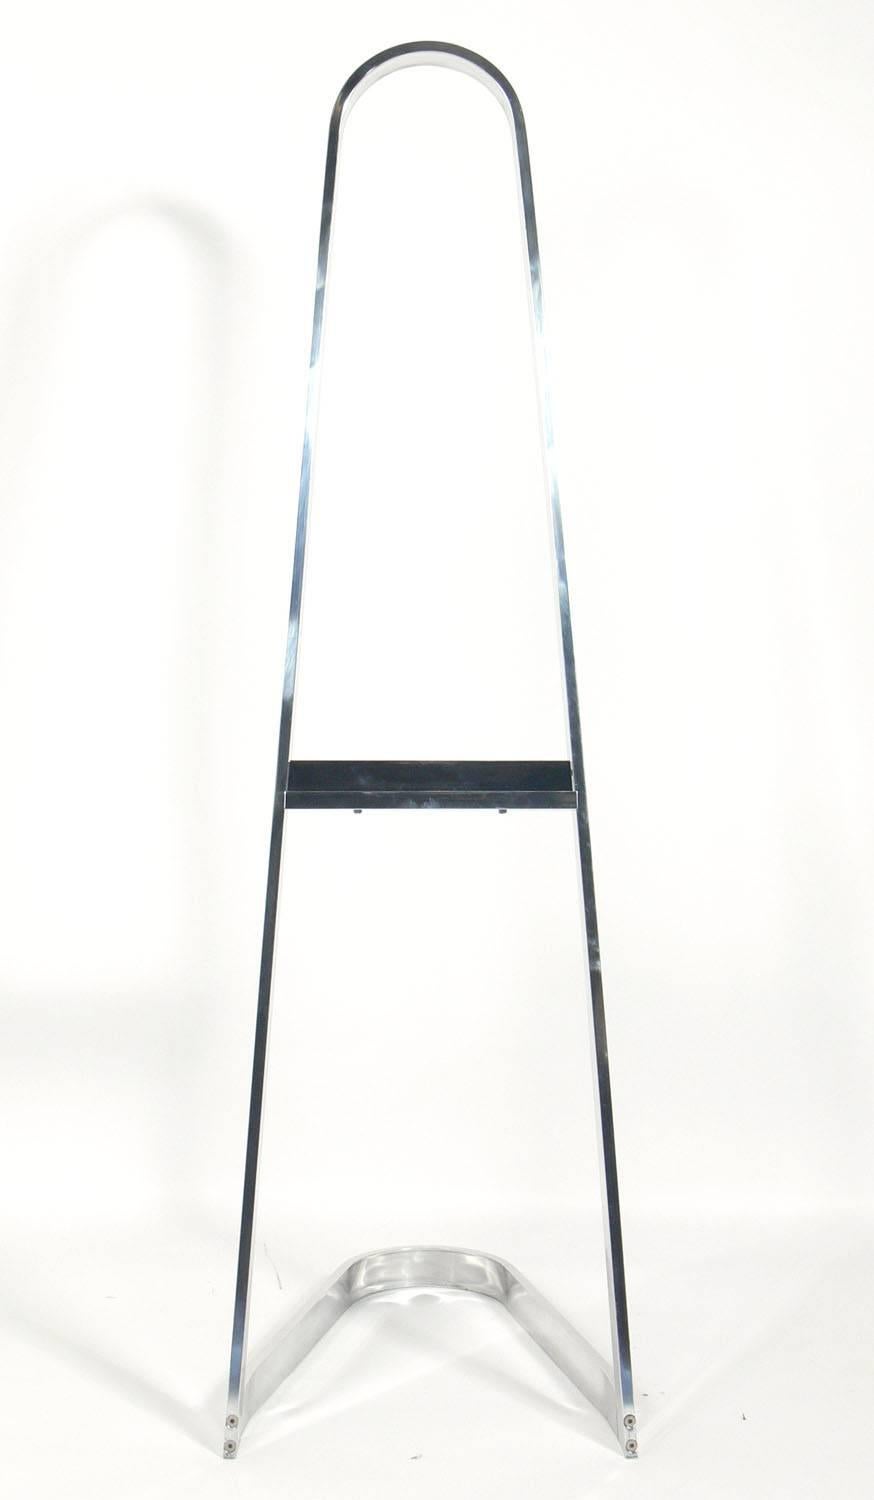 Polished aluminium easel, American, circa 1960s. Clean lined sculptural design. updated